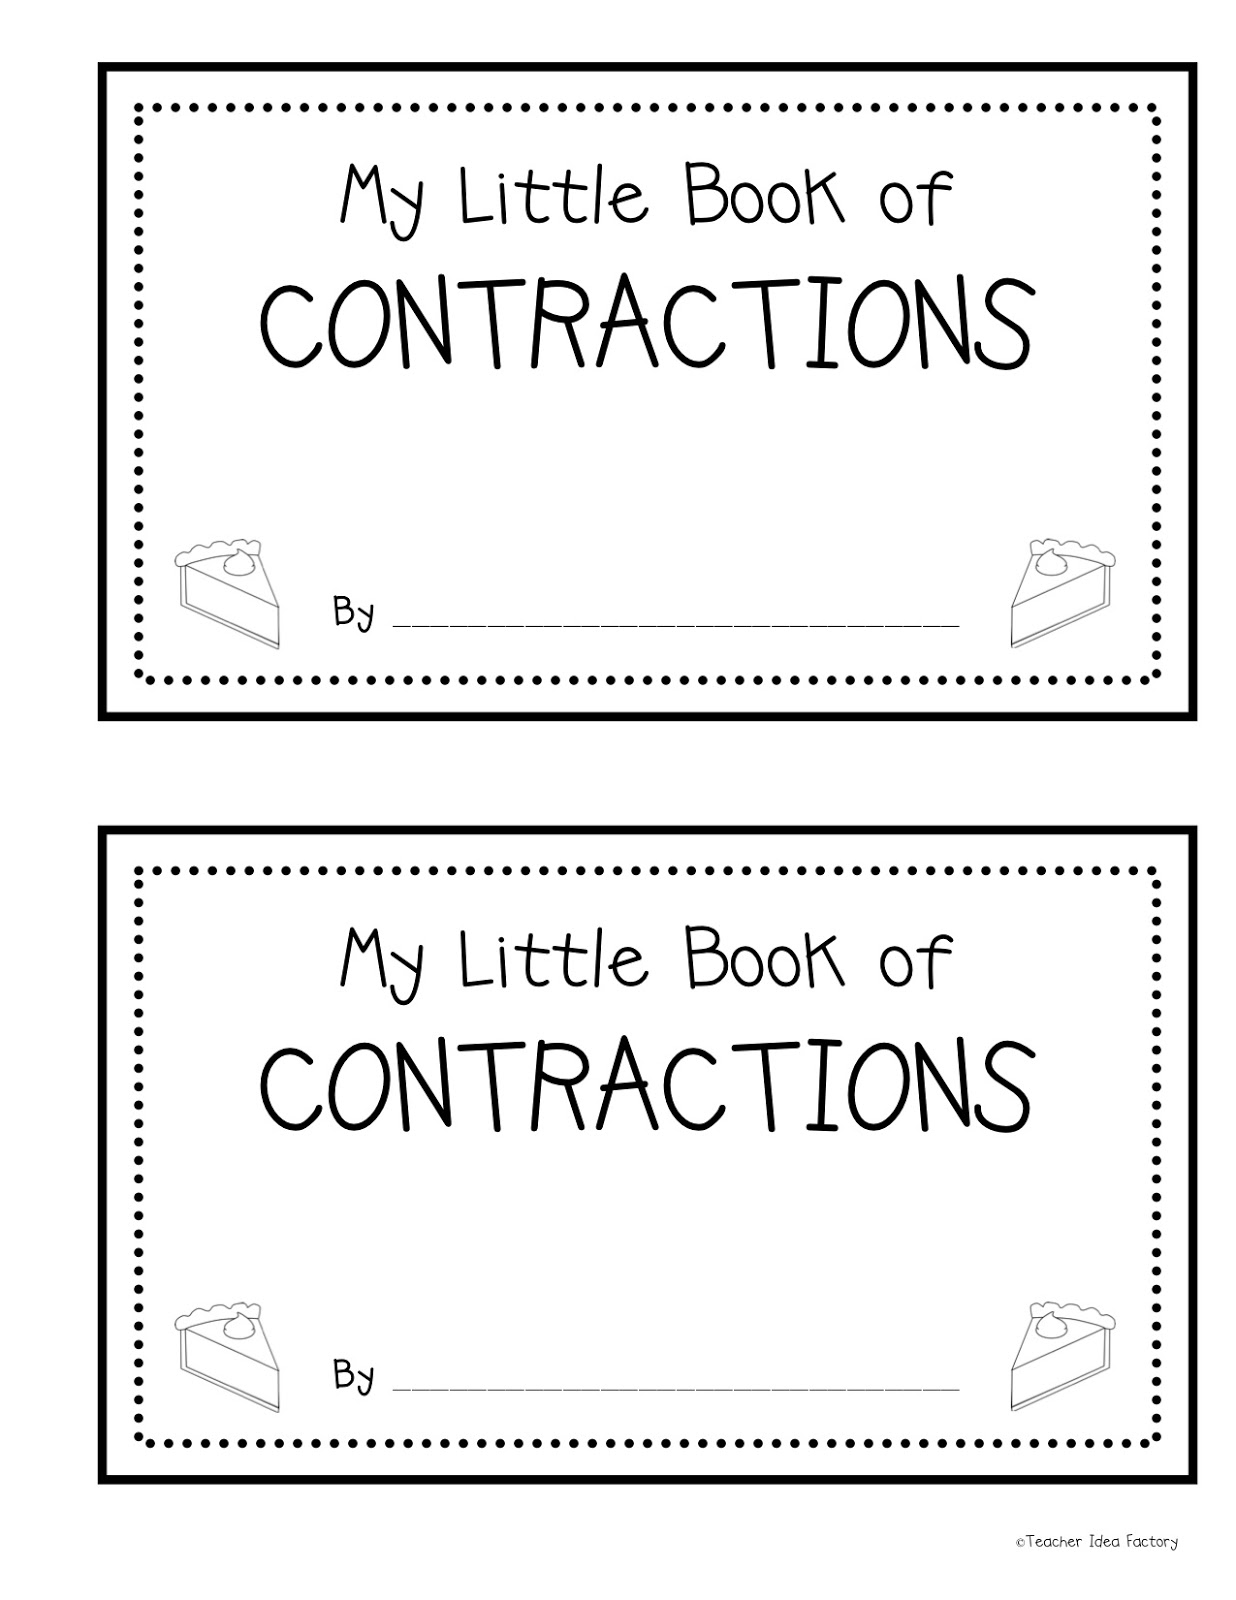 Contractions Worksheet Image